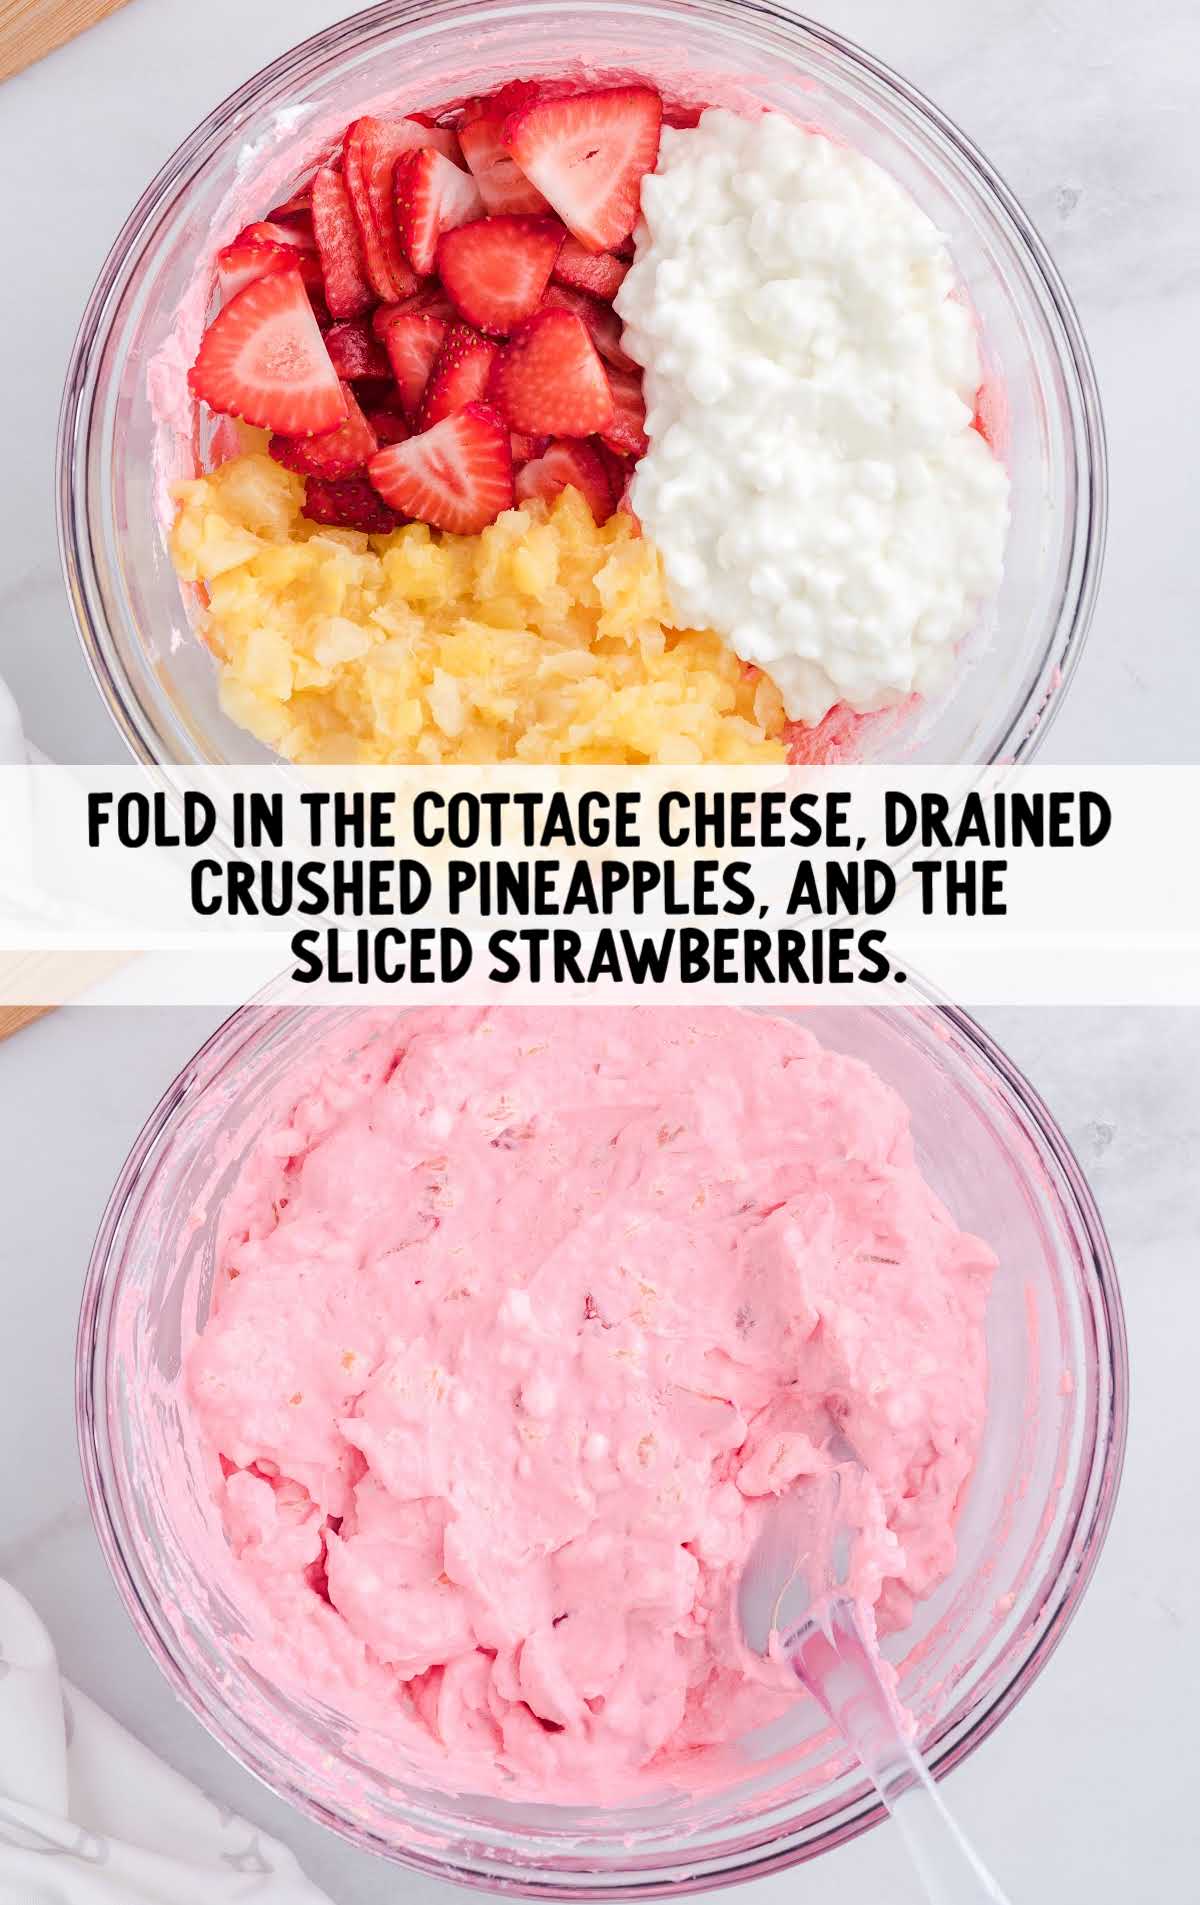 cottage cheese, crushed pineapples and sliced strawberries being folded together in a bowl